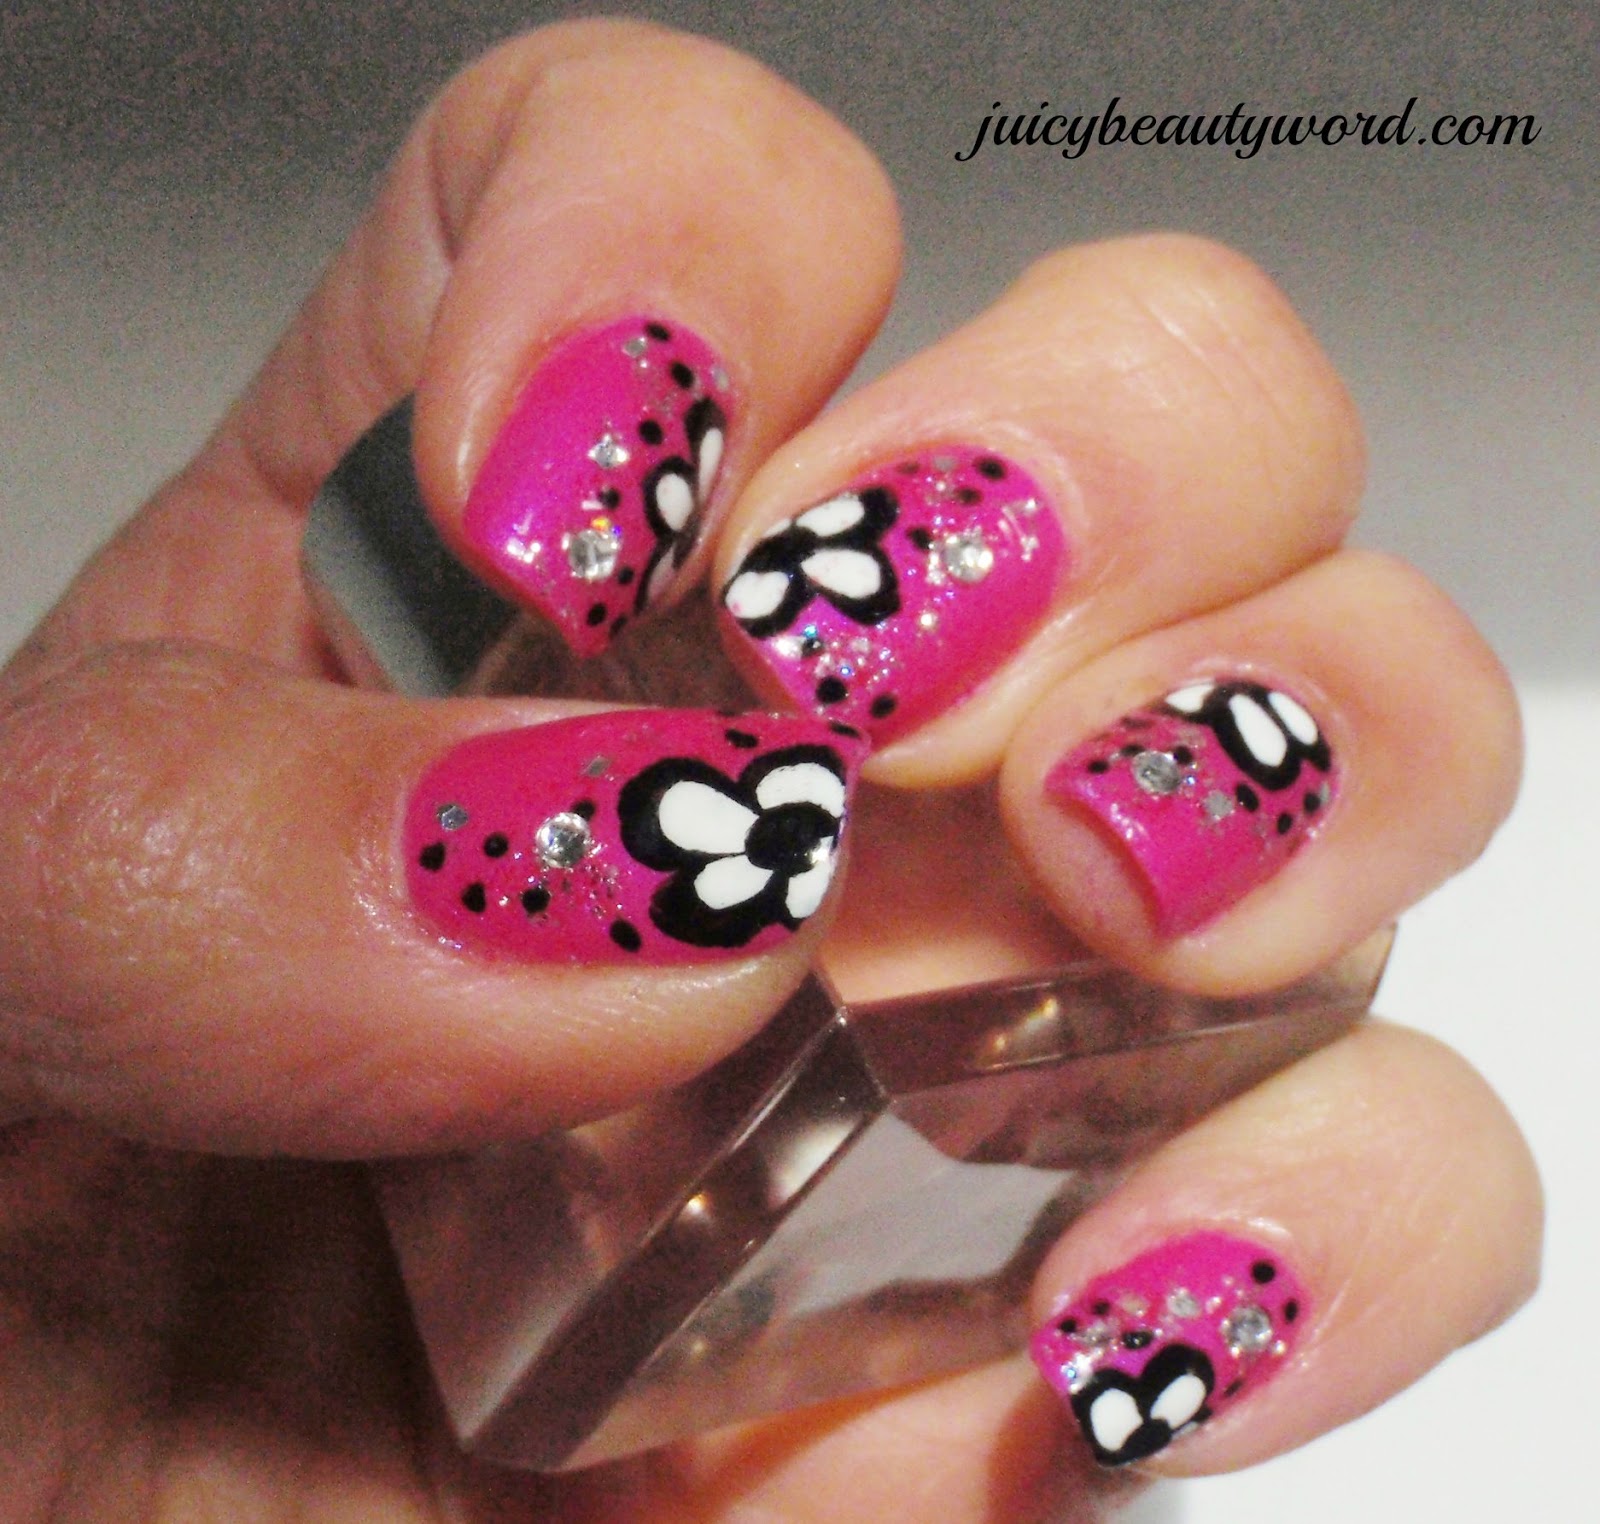 The Juicy Beauty Word Flower Power Nail Designs